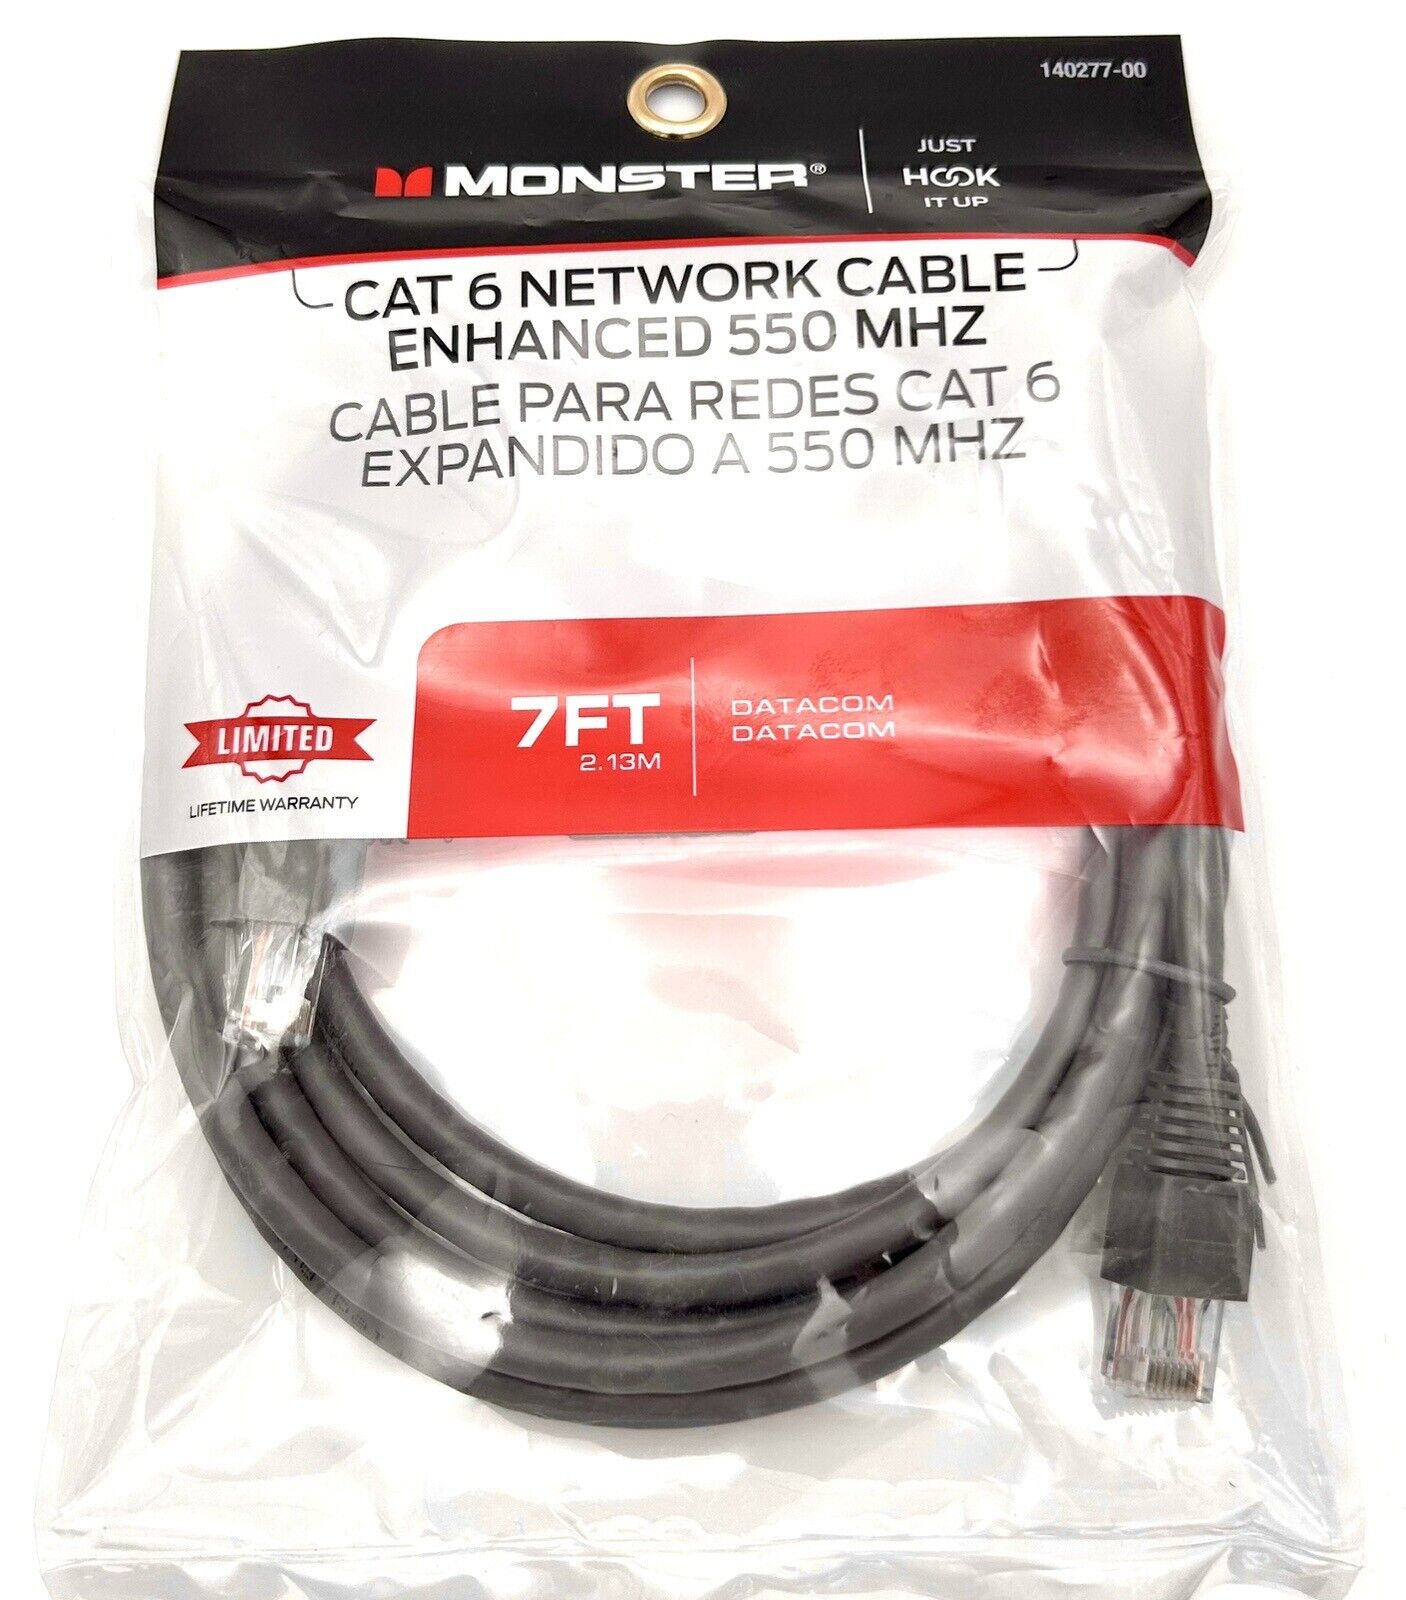 Monster 140277-00 Cat 6 Network Cable ENHANCED 550 MHZ JUST HOOK IT UP